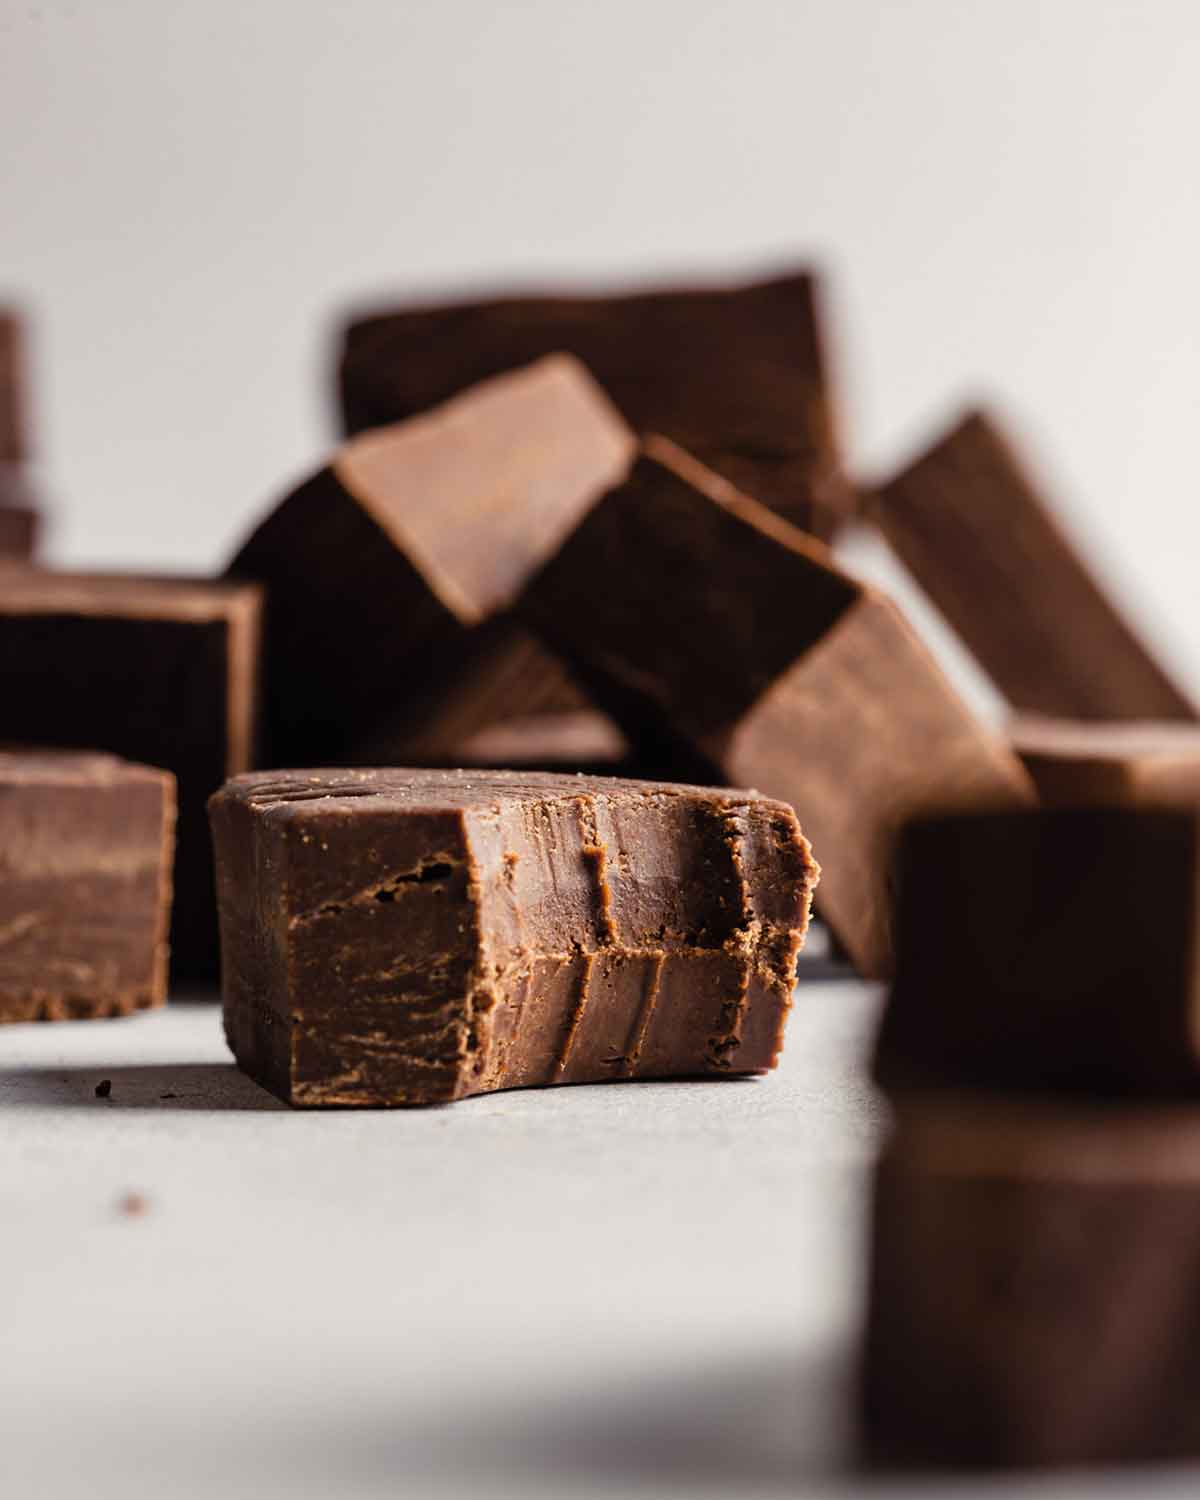 A single piece of fudge with a bite taken out of it in the foreground with squares of fudge stacked in the background.